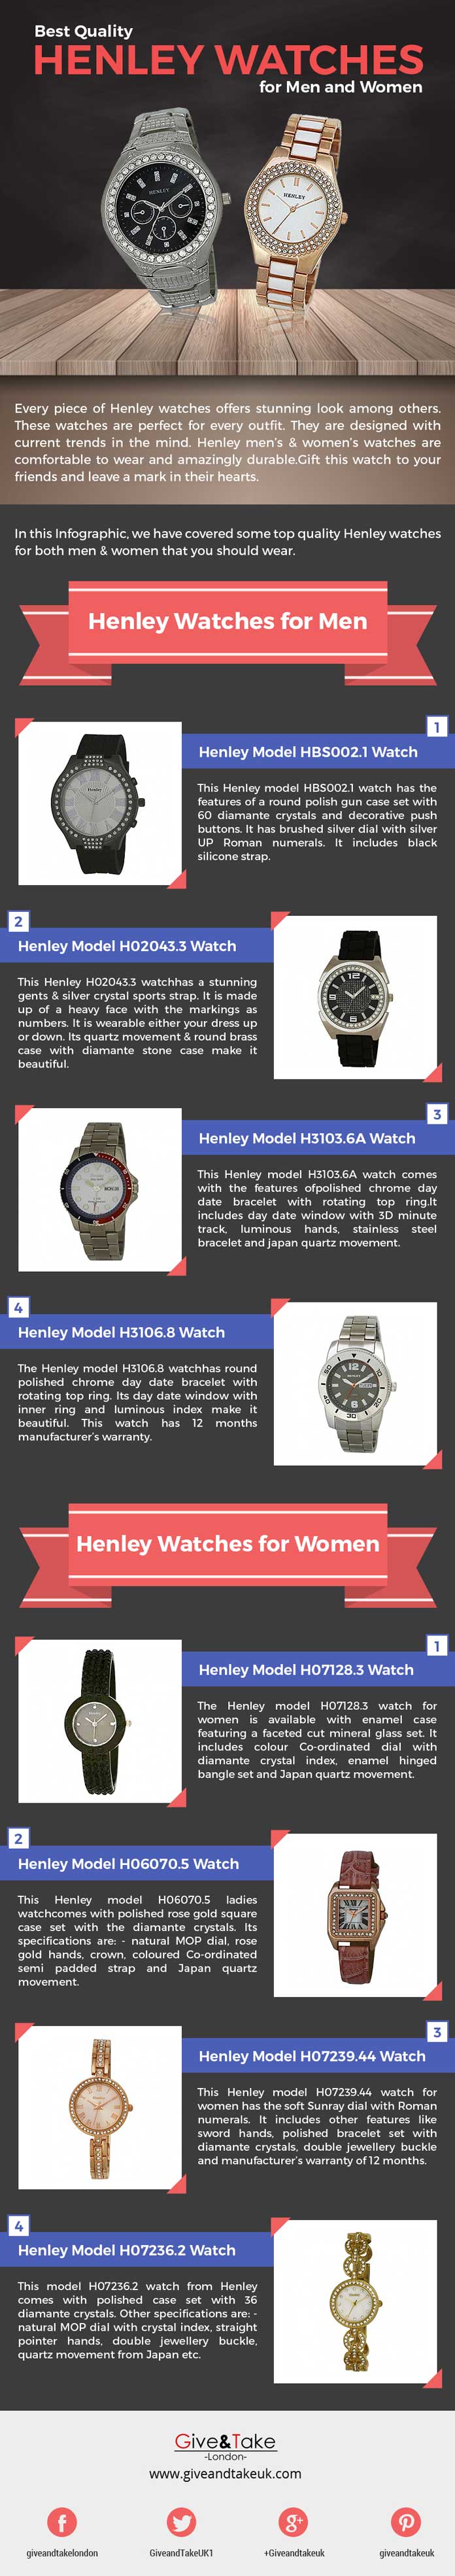 Best-Quality-Henley-Watches-for-Men-and-Women